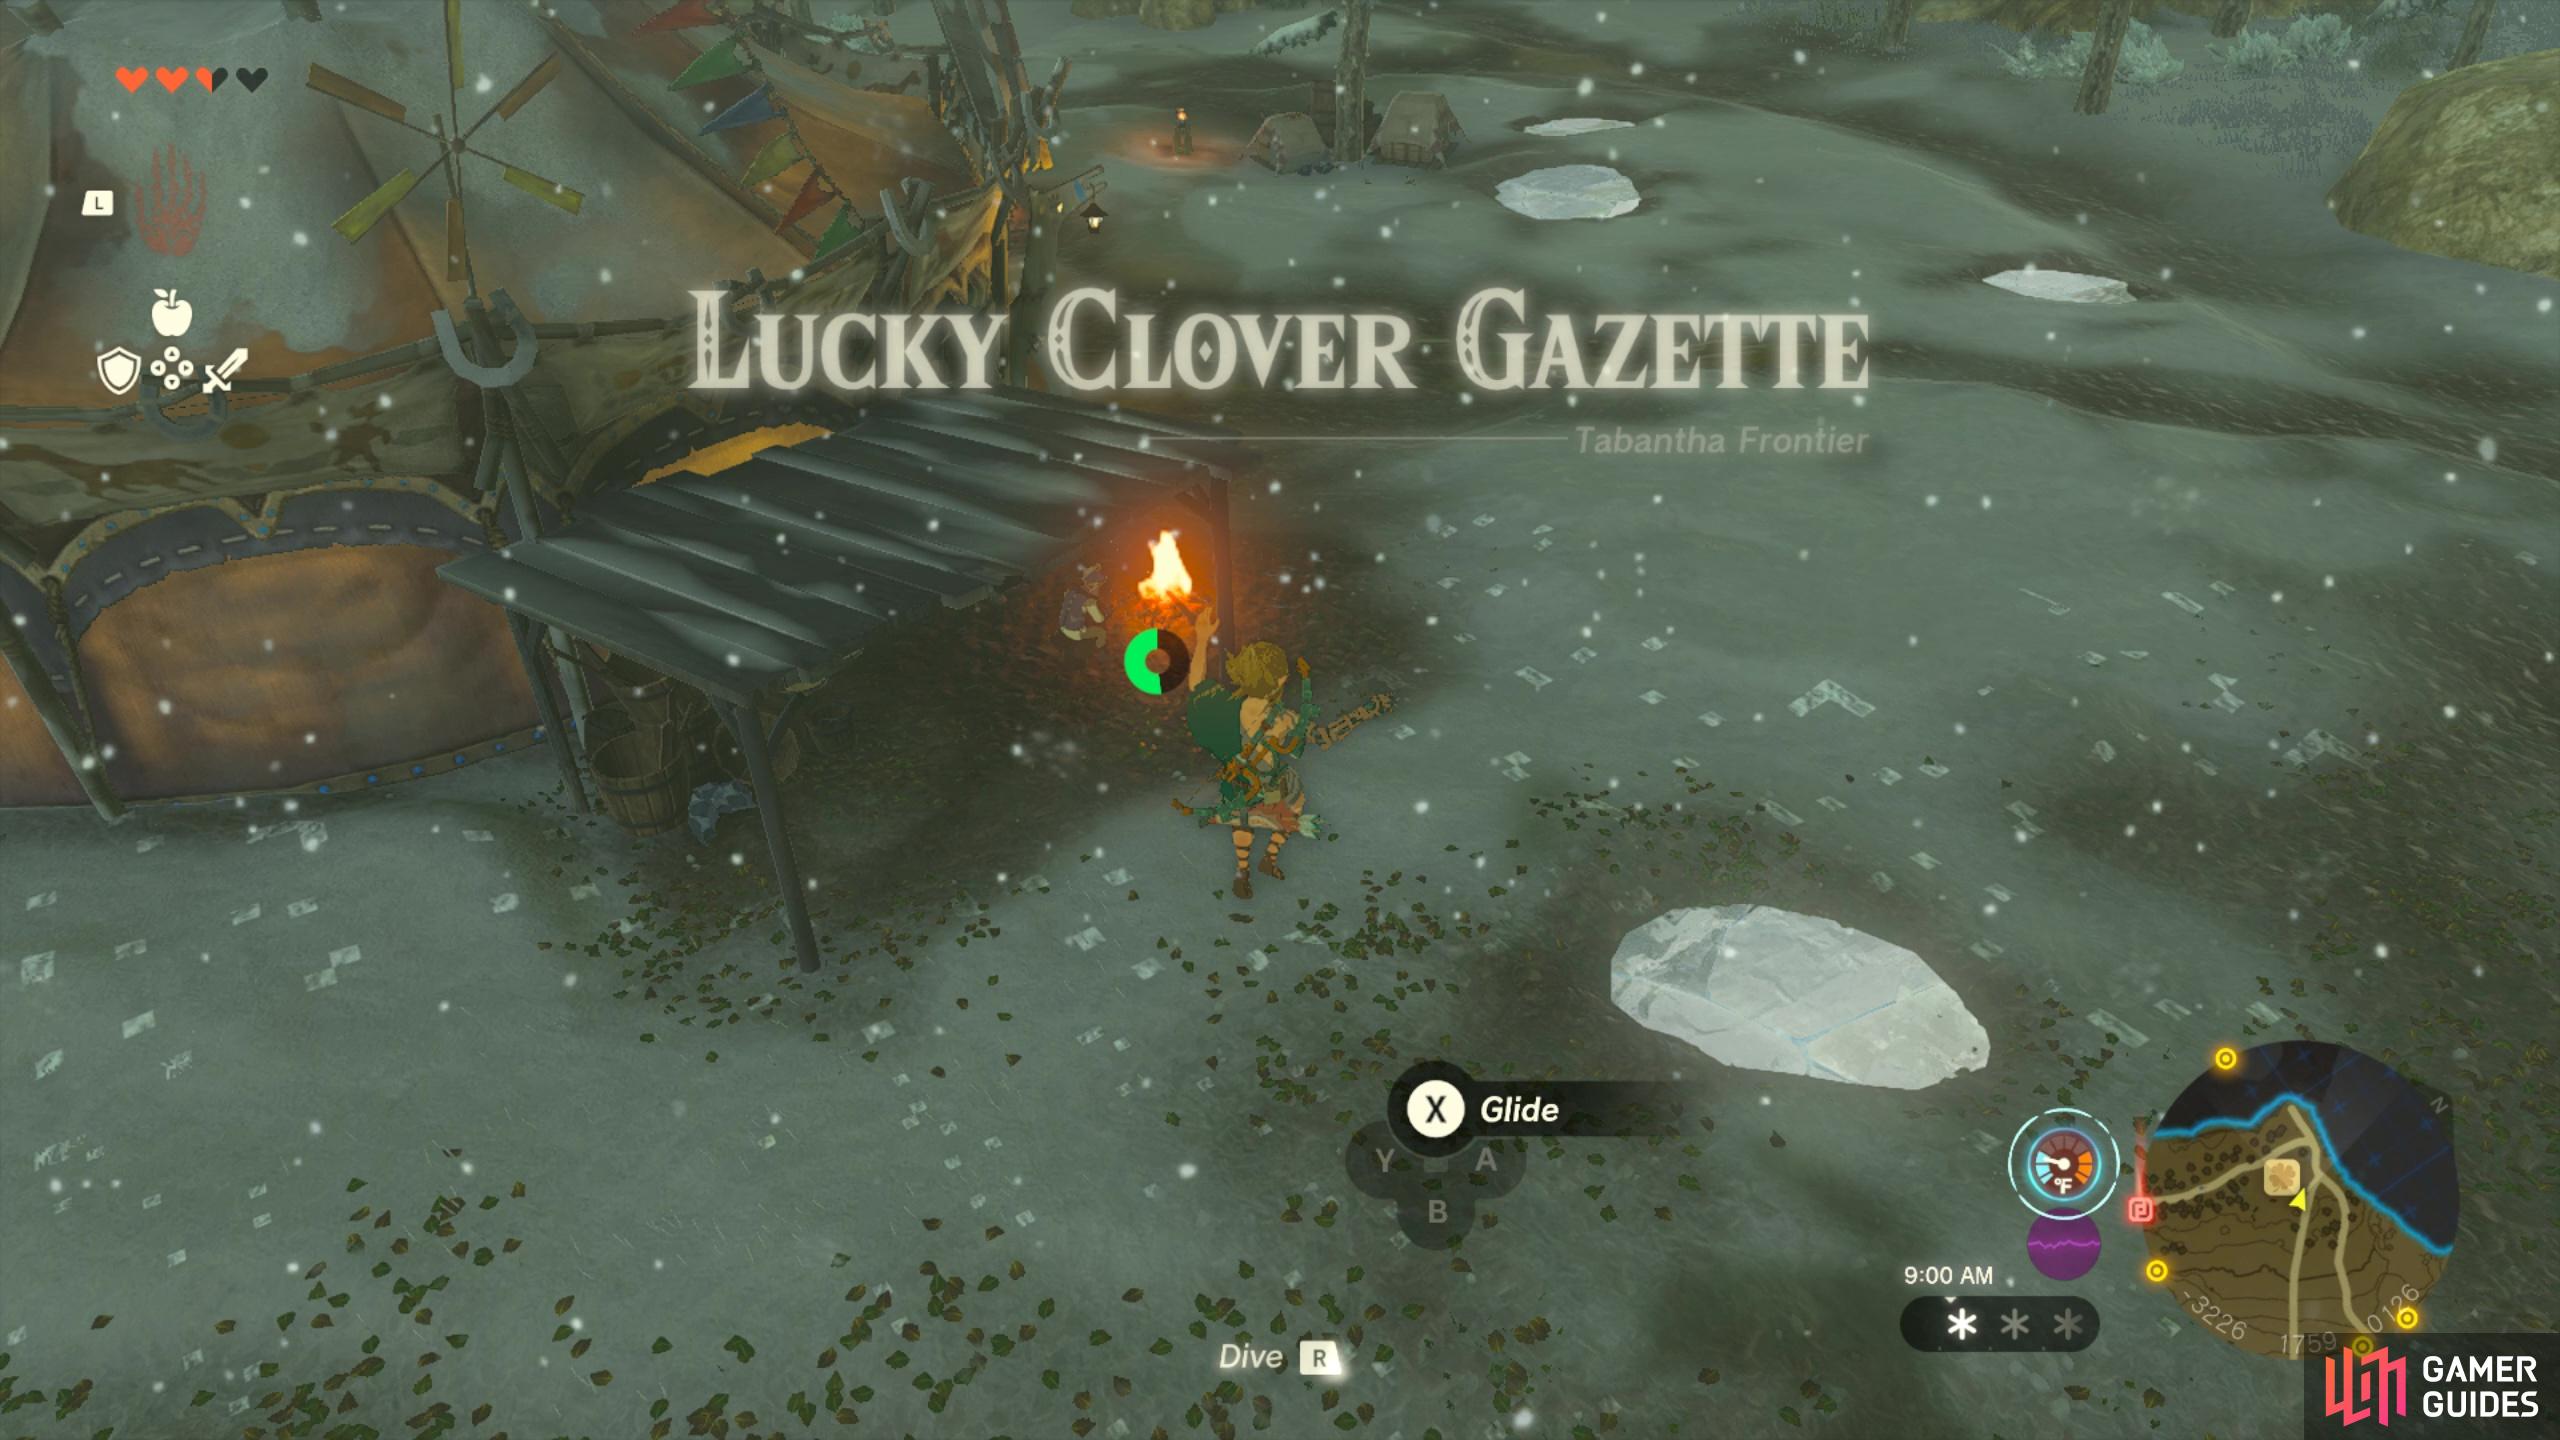 The Lucky Clover Gazette is technically not a stable!